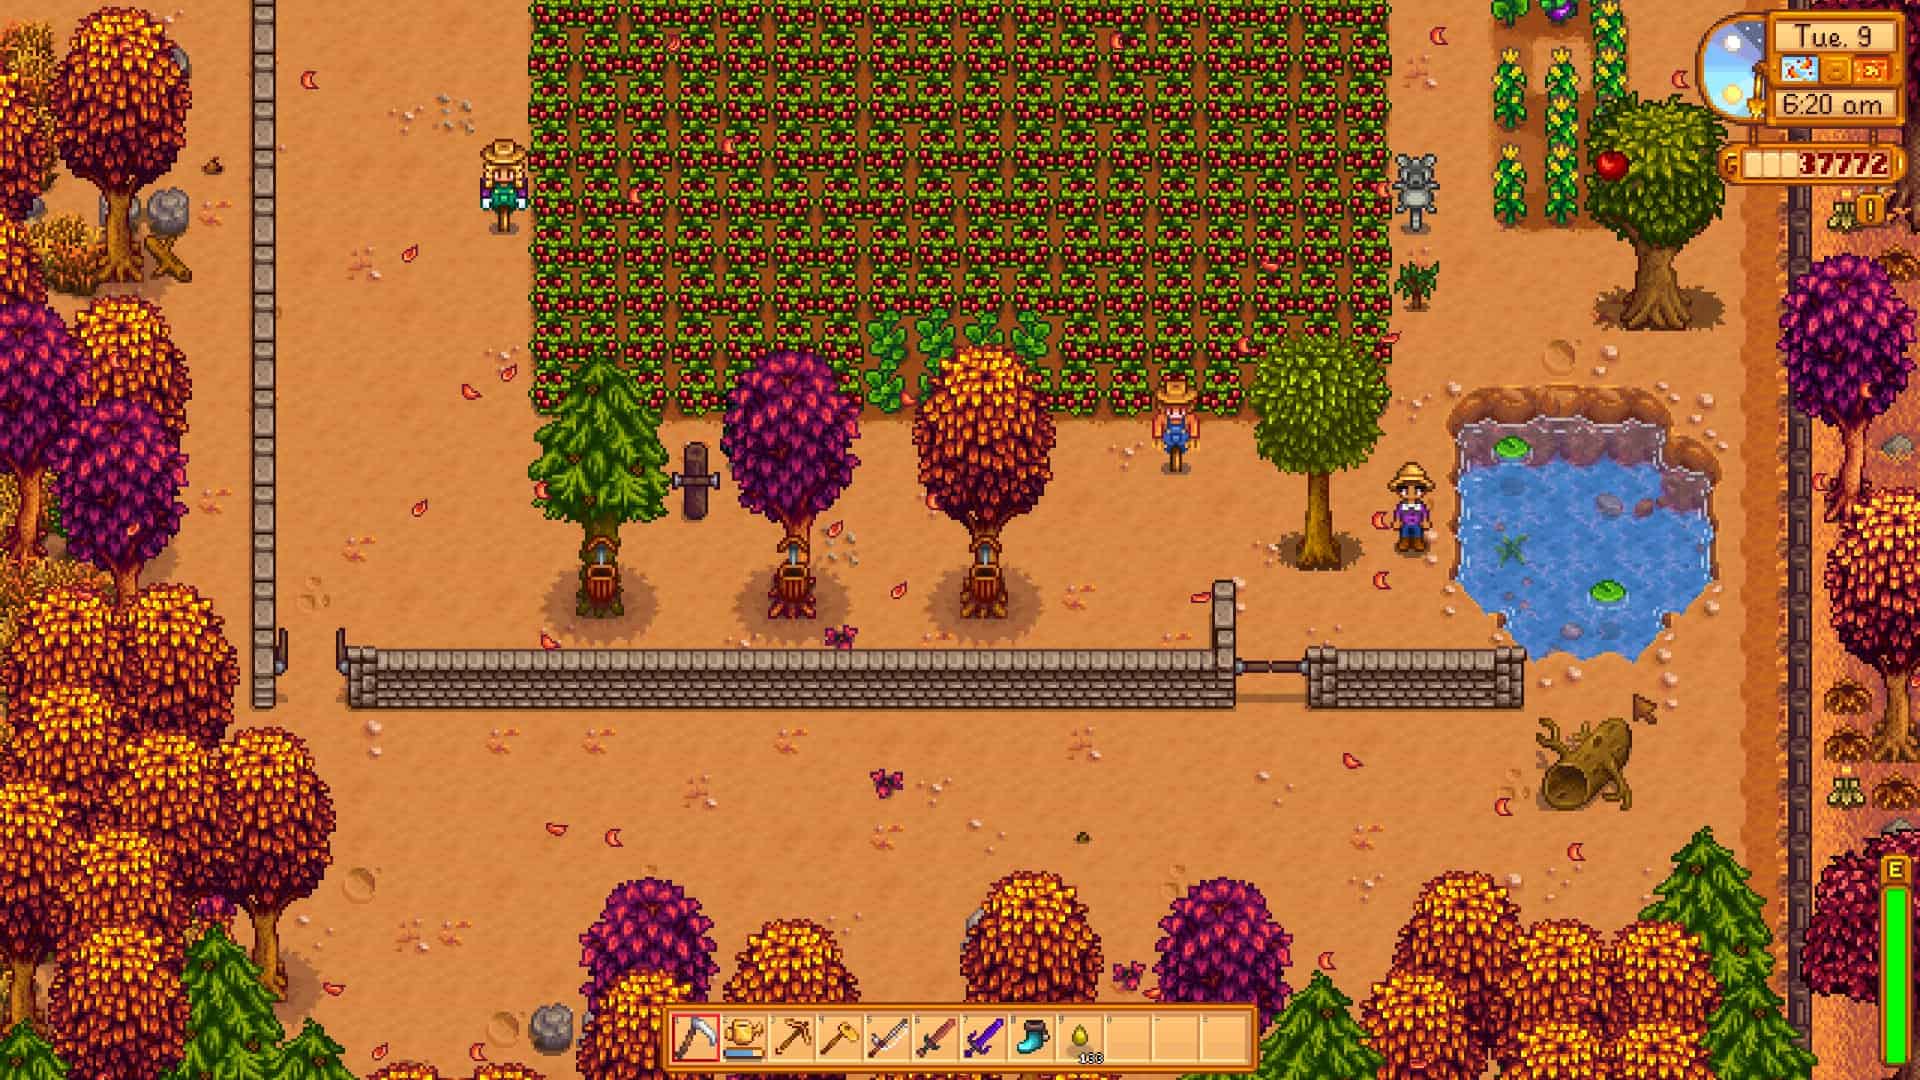 Stardew Valley cheats: A player standing on their farm with a field of tomatoes ready to harvest.